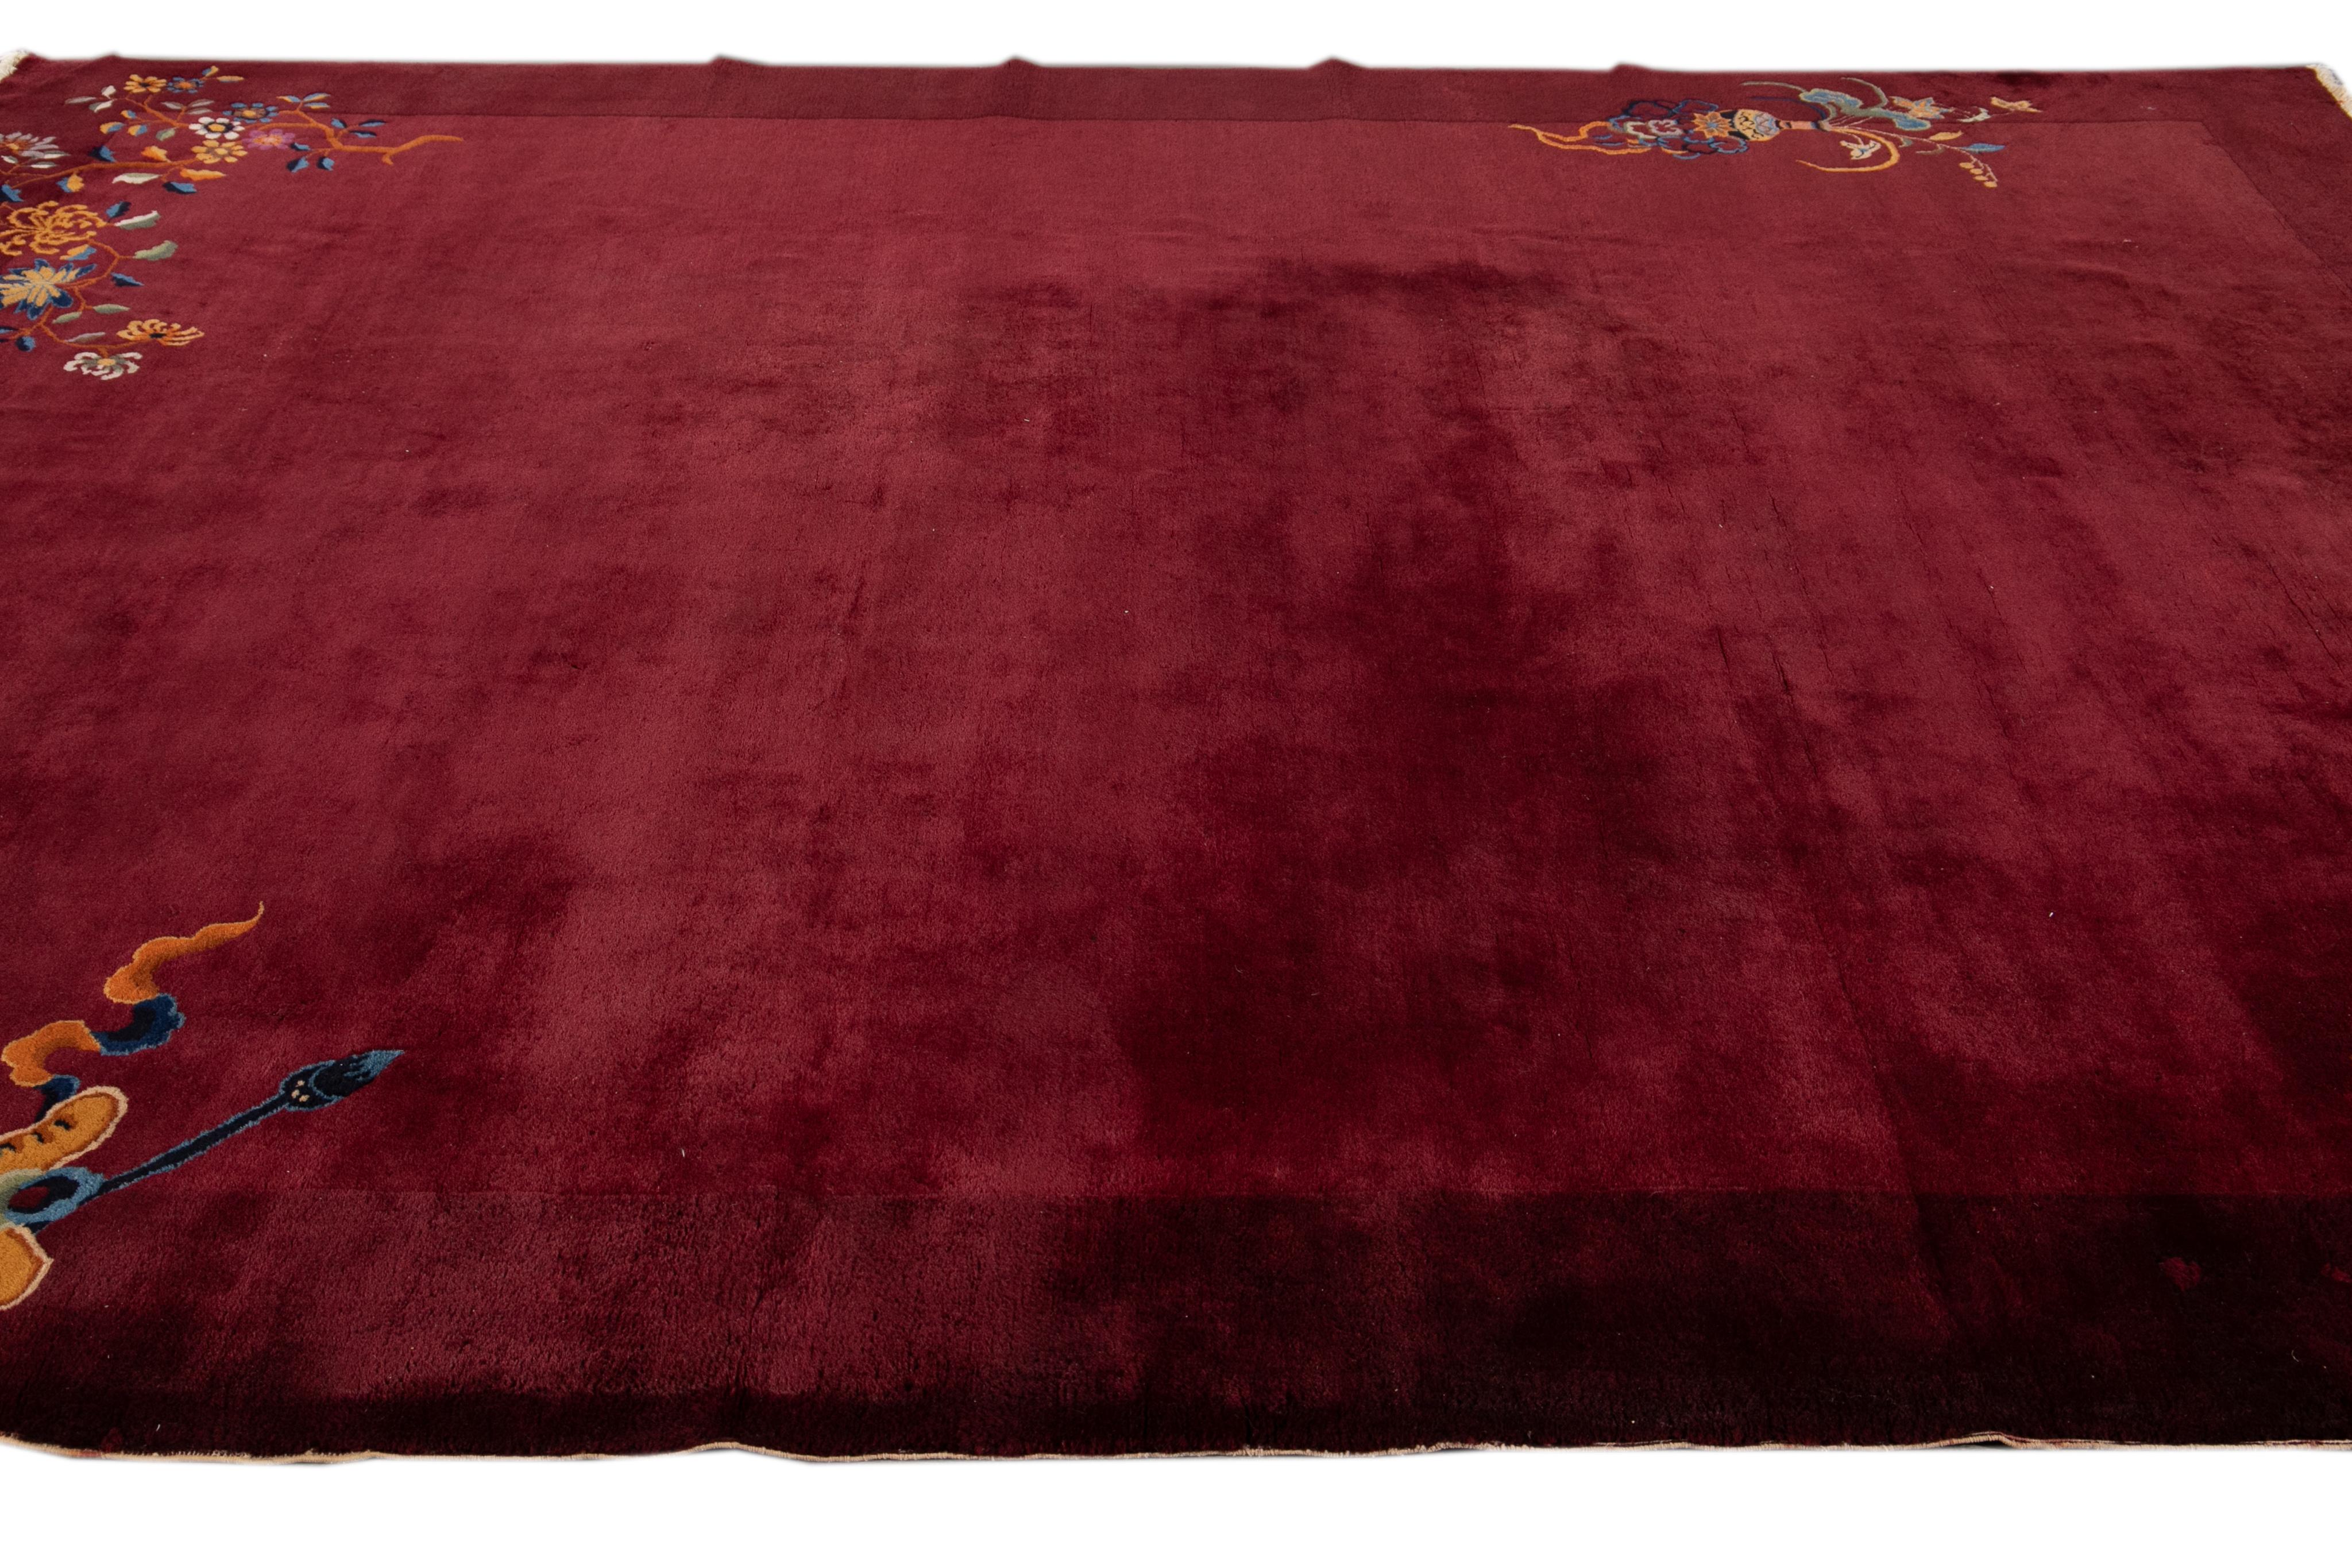 Antique Burgundy Red Art Deco Chinese Wool Rug 9 Ft X 11 Ft 6 In 1